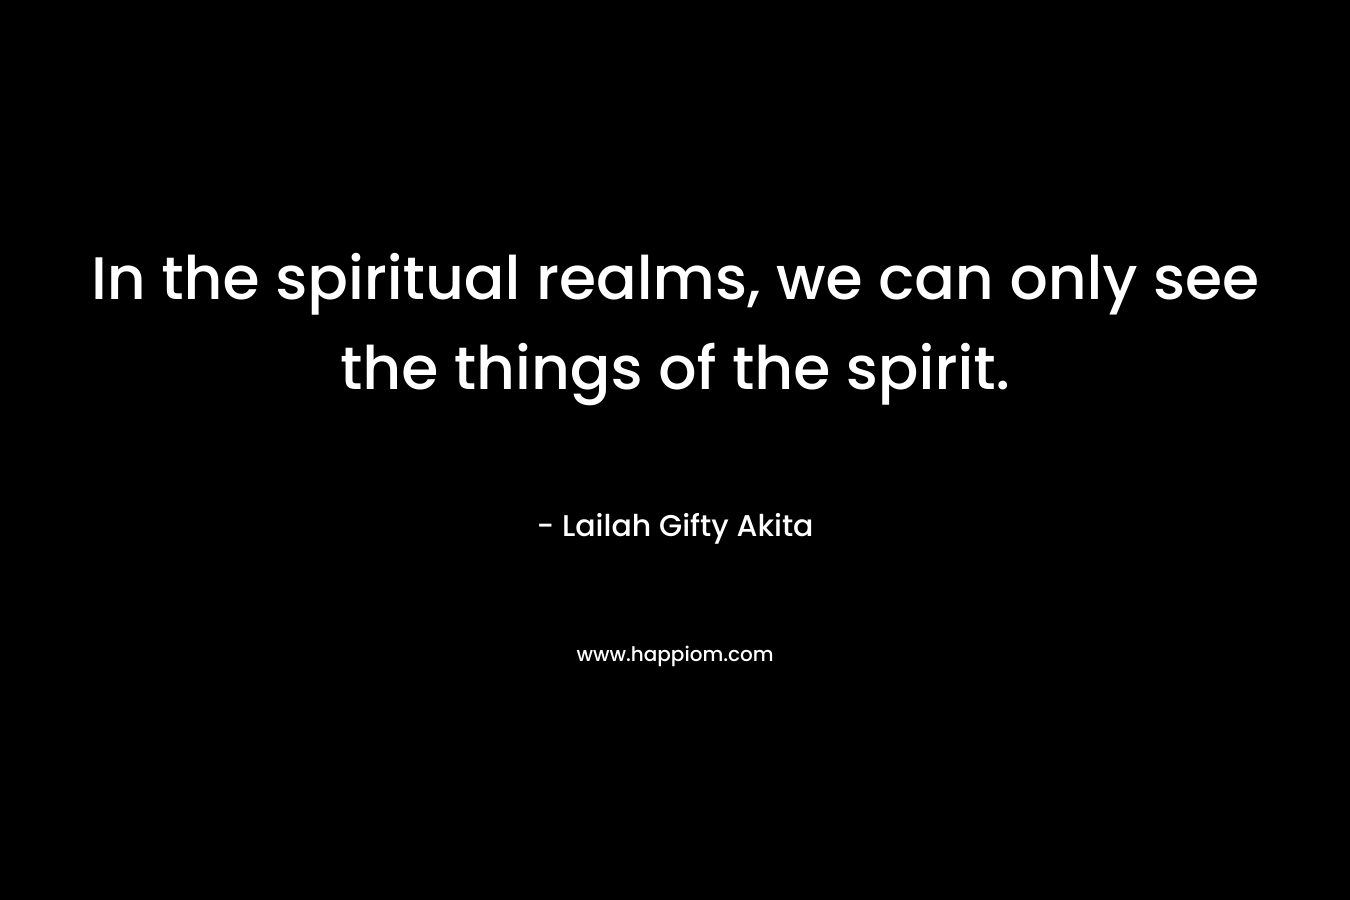 In the spiritual realms, we can only see the things of the spirit.